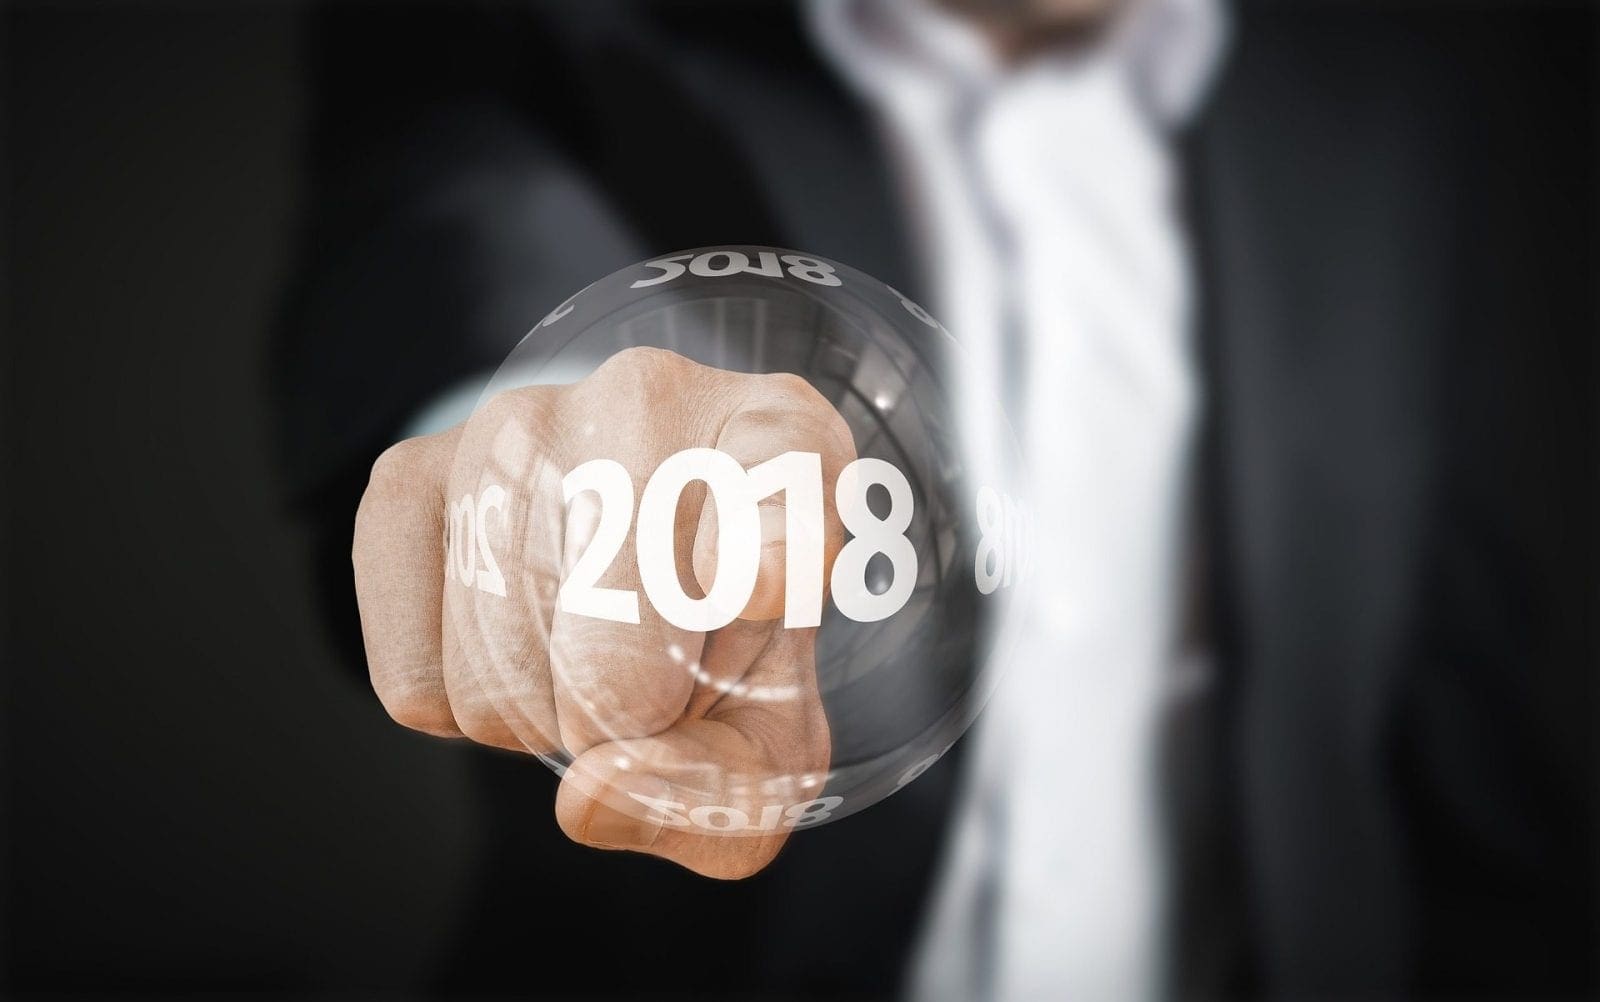 Focus Areas and Trends for the 2018 CIO